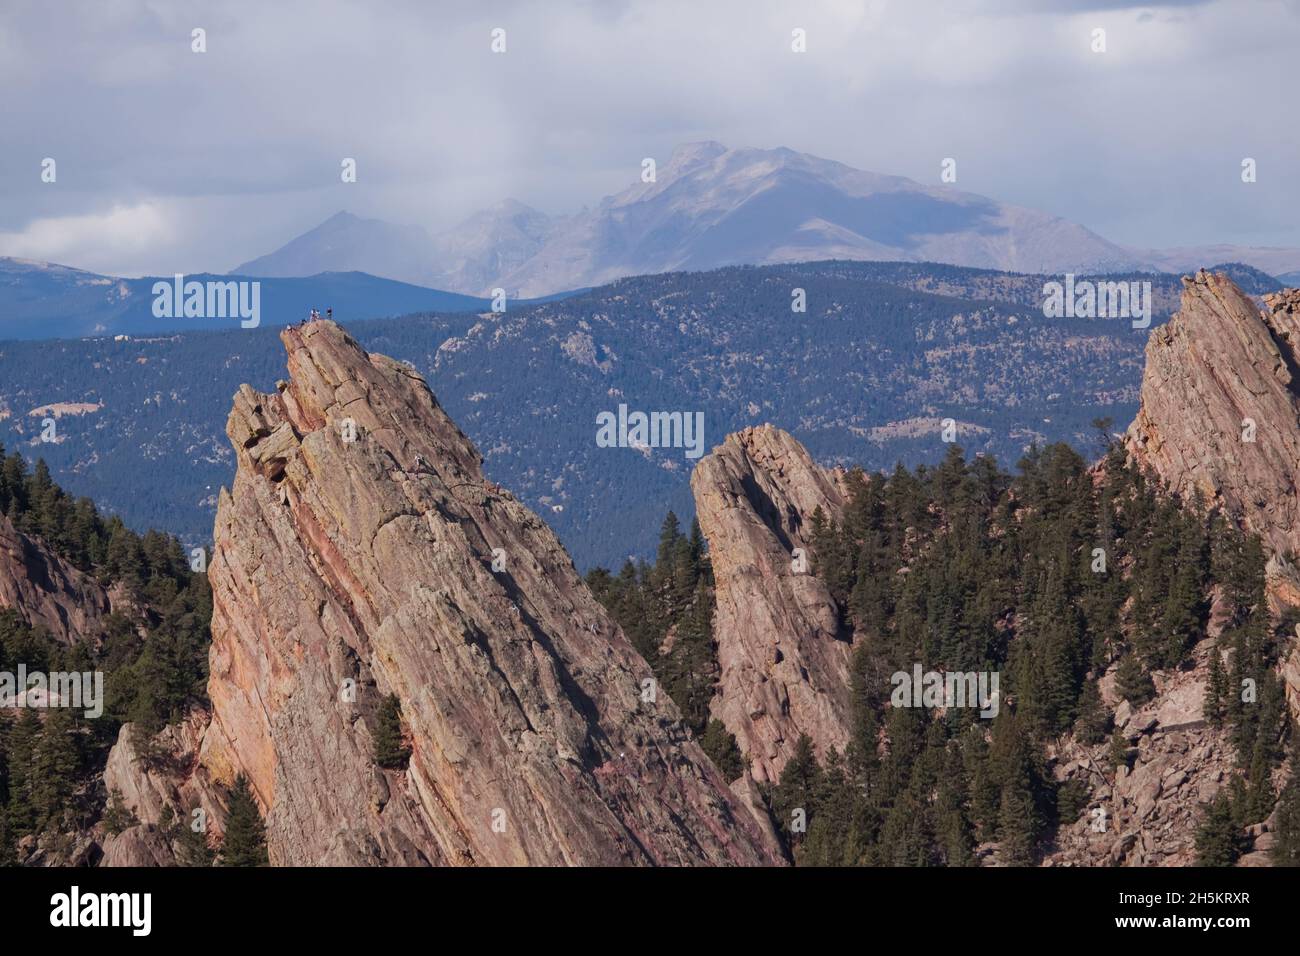 Climbers summit the famous flatirons with Longs peak in the Distance. Stock Photo